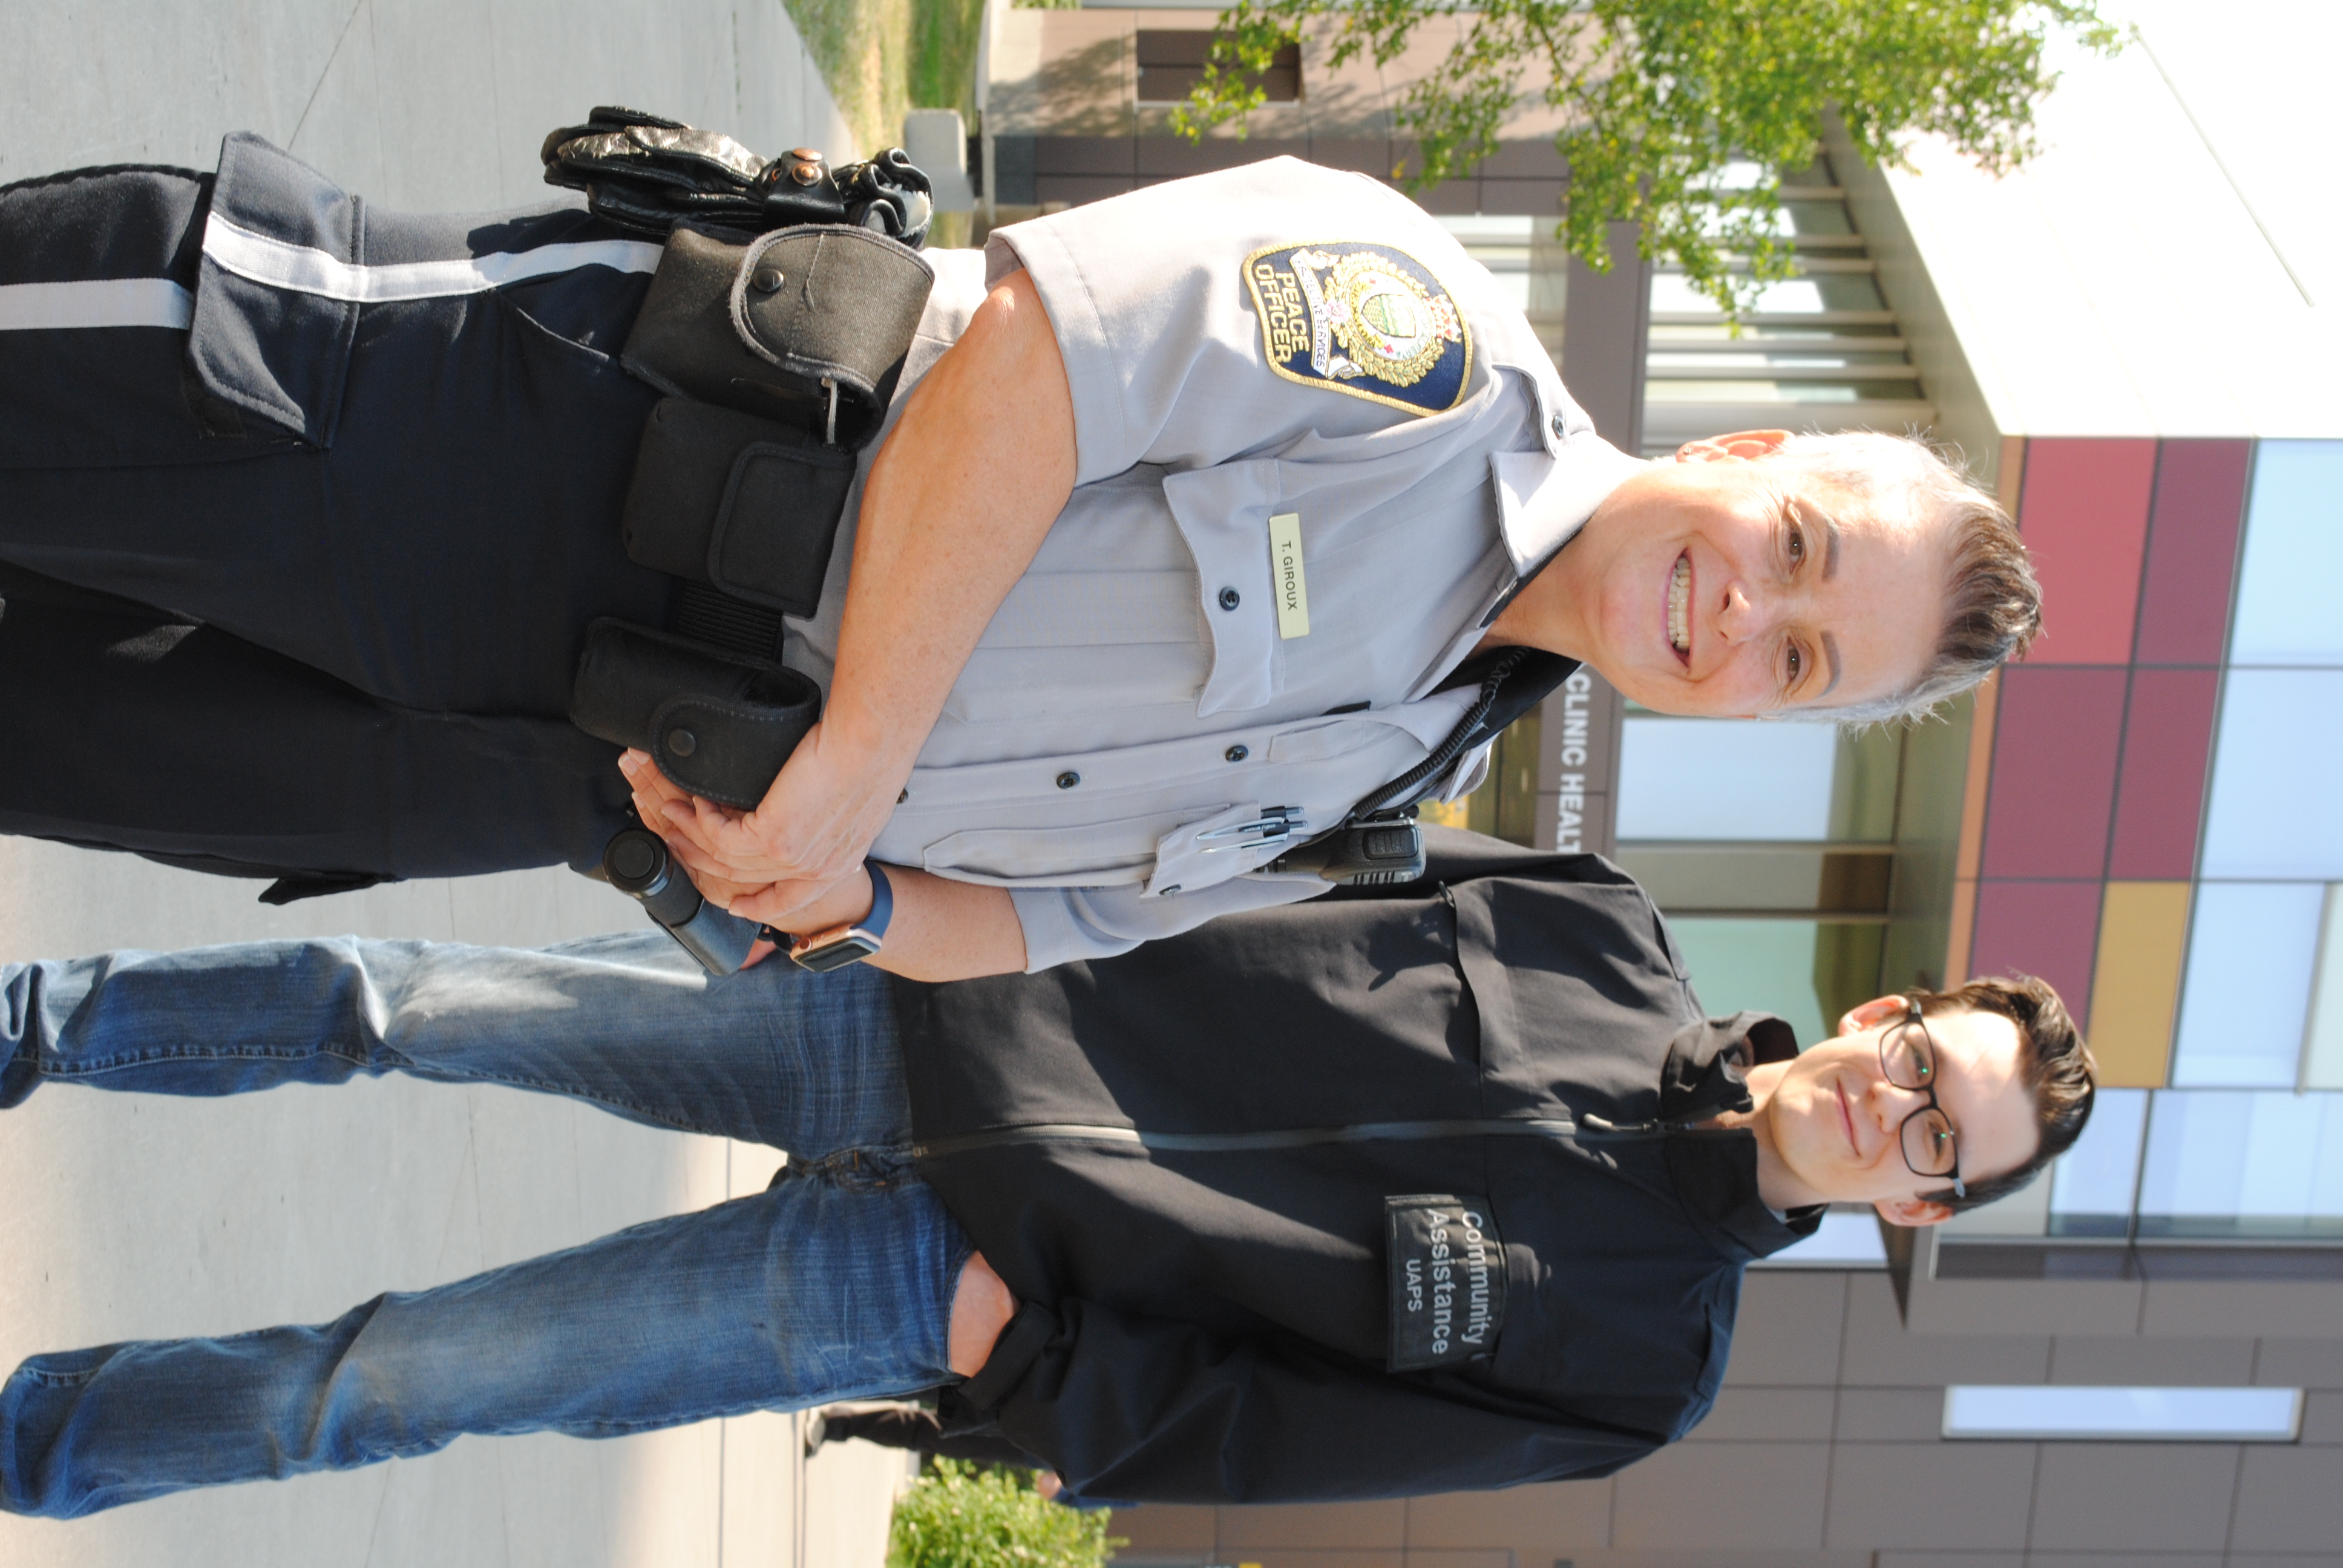 Peace Officer and Community Assistance person smiling